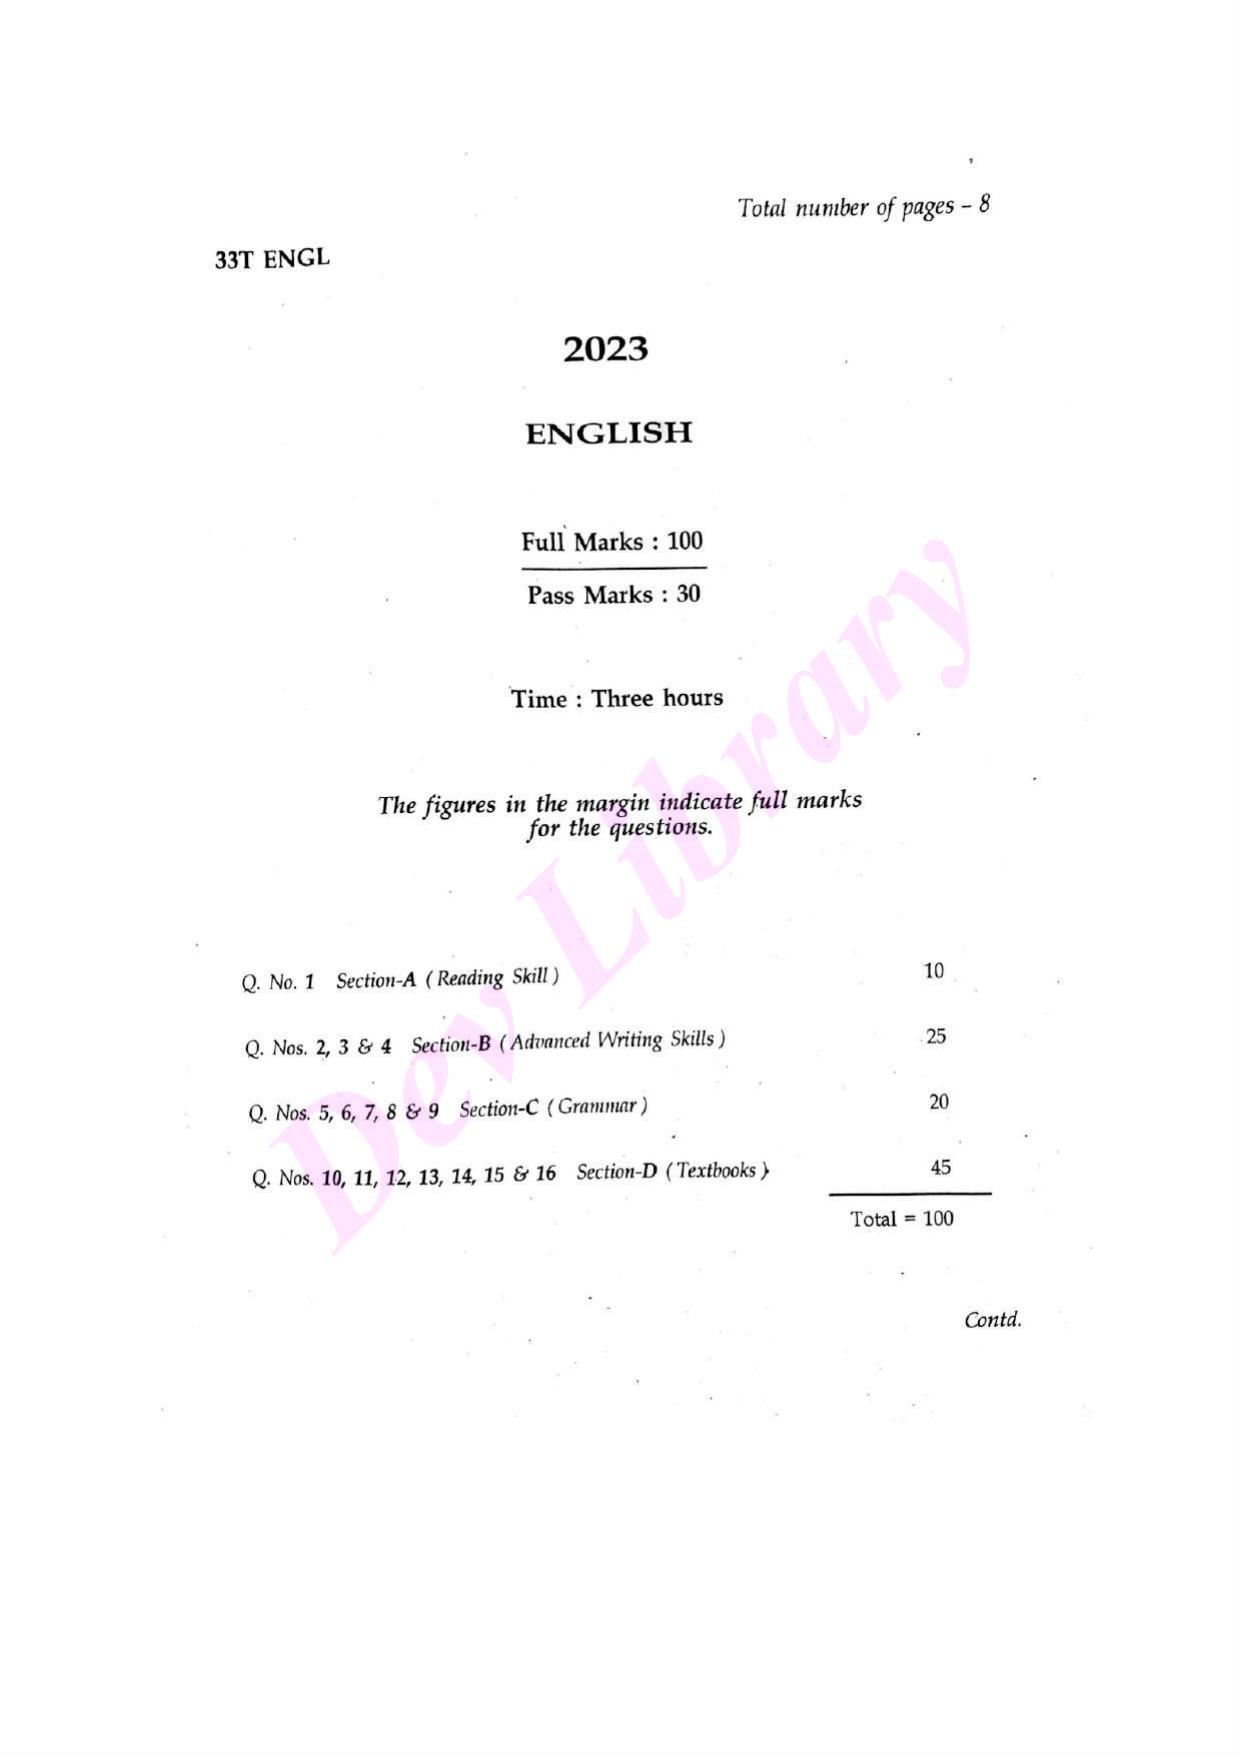 Assam HS 2nd Year English 2023 Question Paper - Page 1